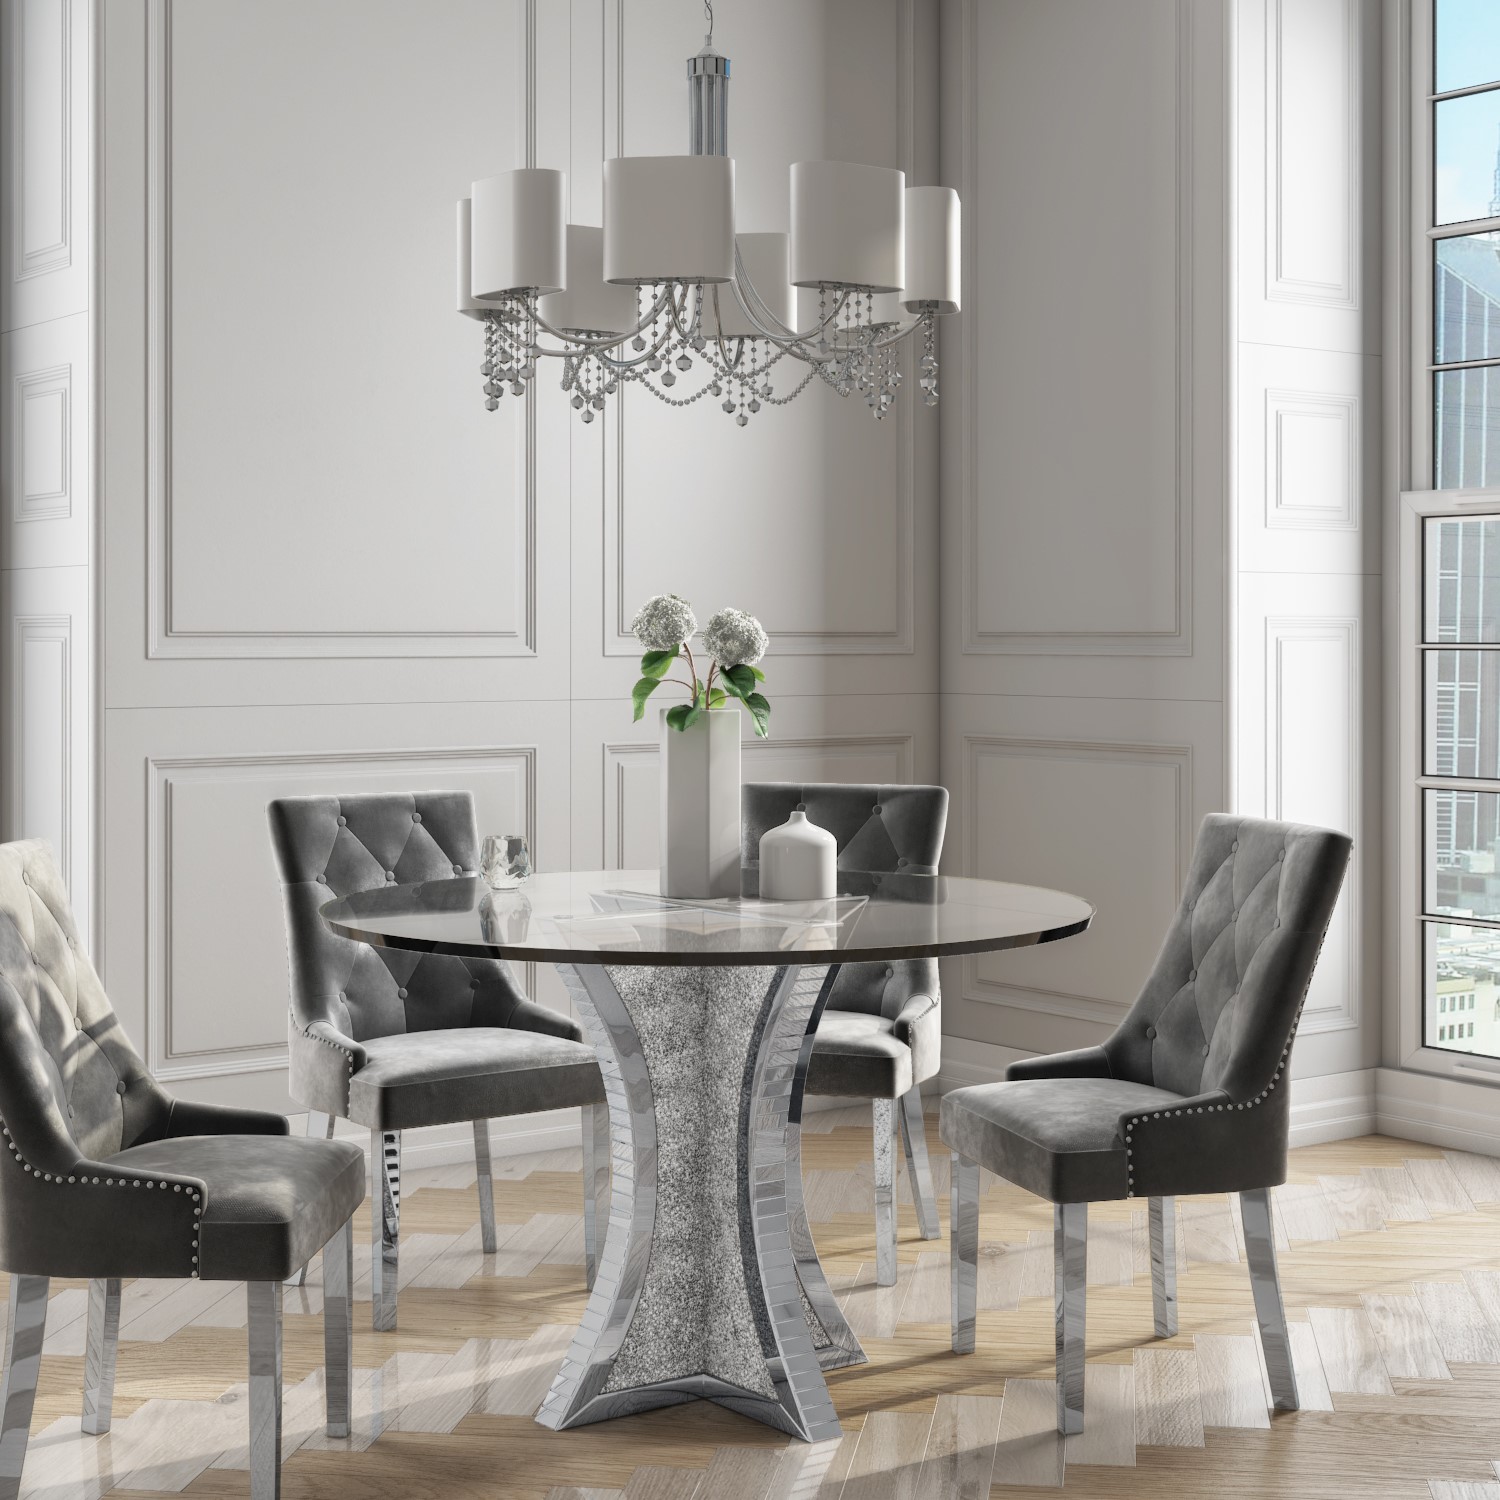 Jade Boutique Round Mirrored Dining Table with 4 Chairs in 